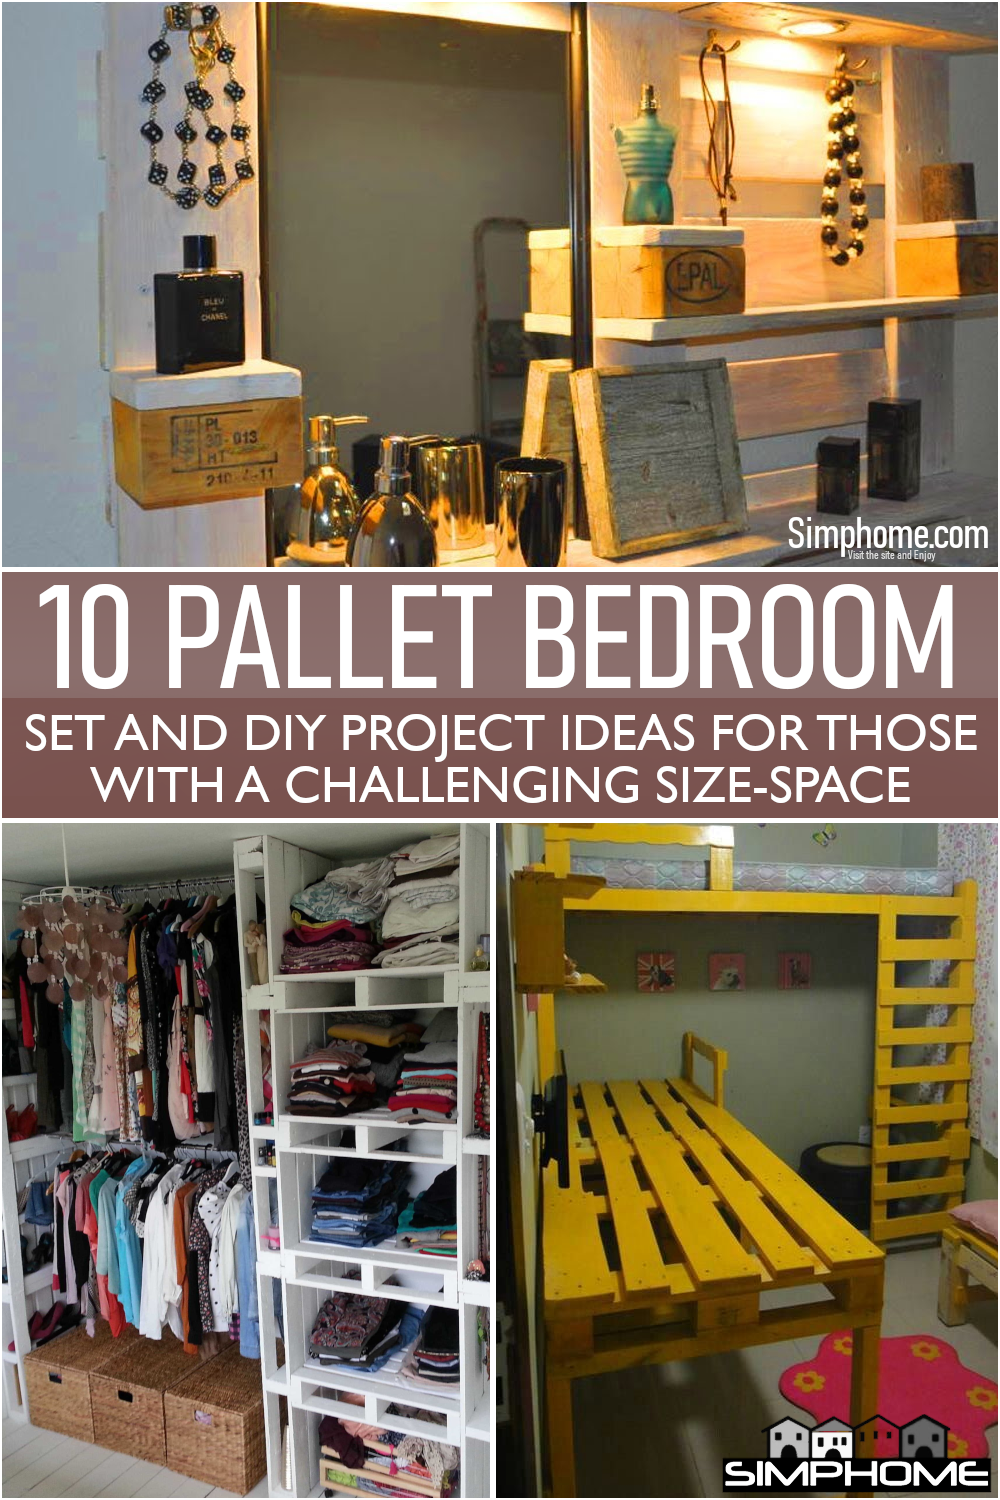 Learn more about 10 Pallet Bedroom Sets and DIY Project Ideas here